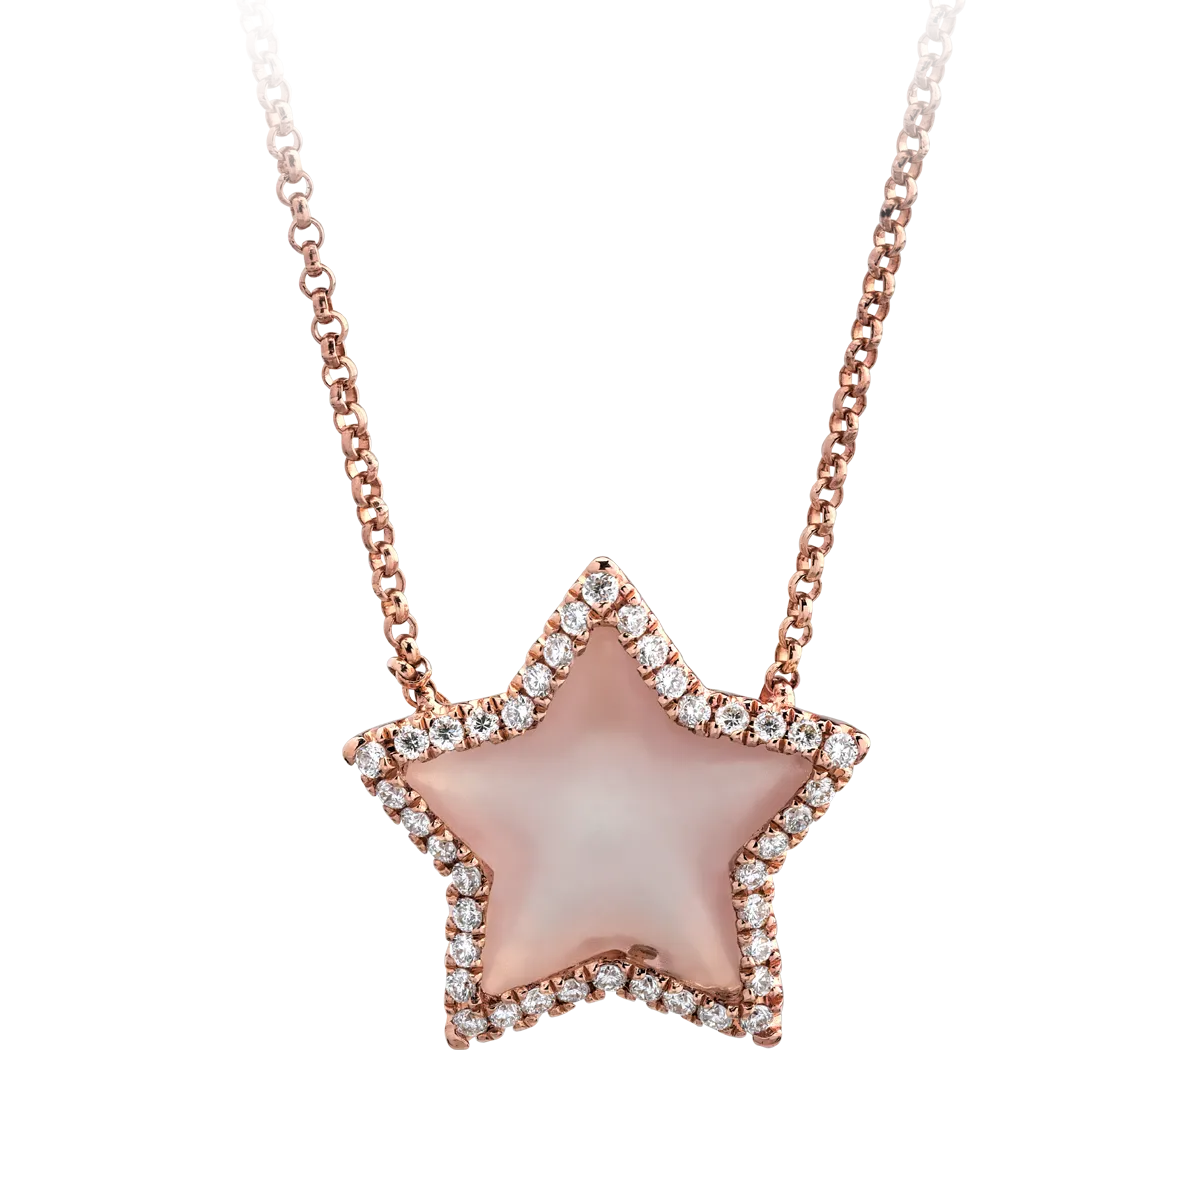 18K rose gold pendant necklace with pink moonstone of 2.1ct and diamonds of 0.23ct